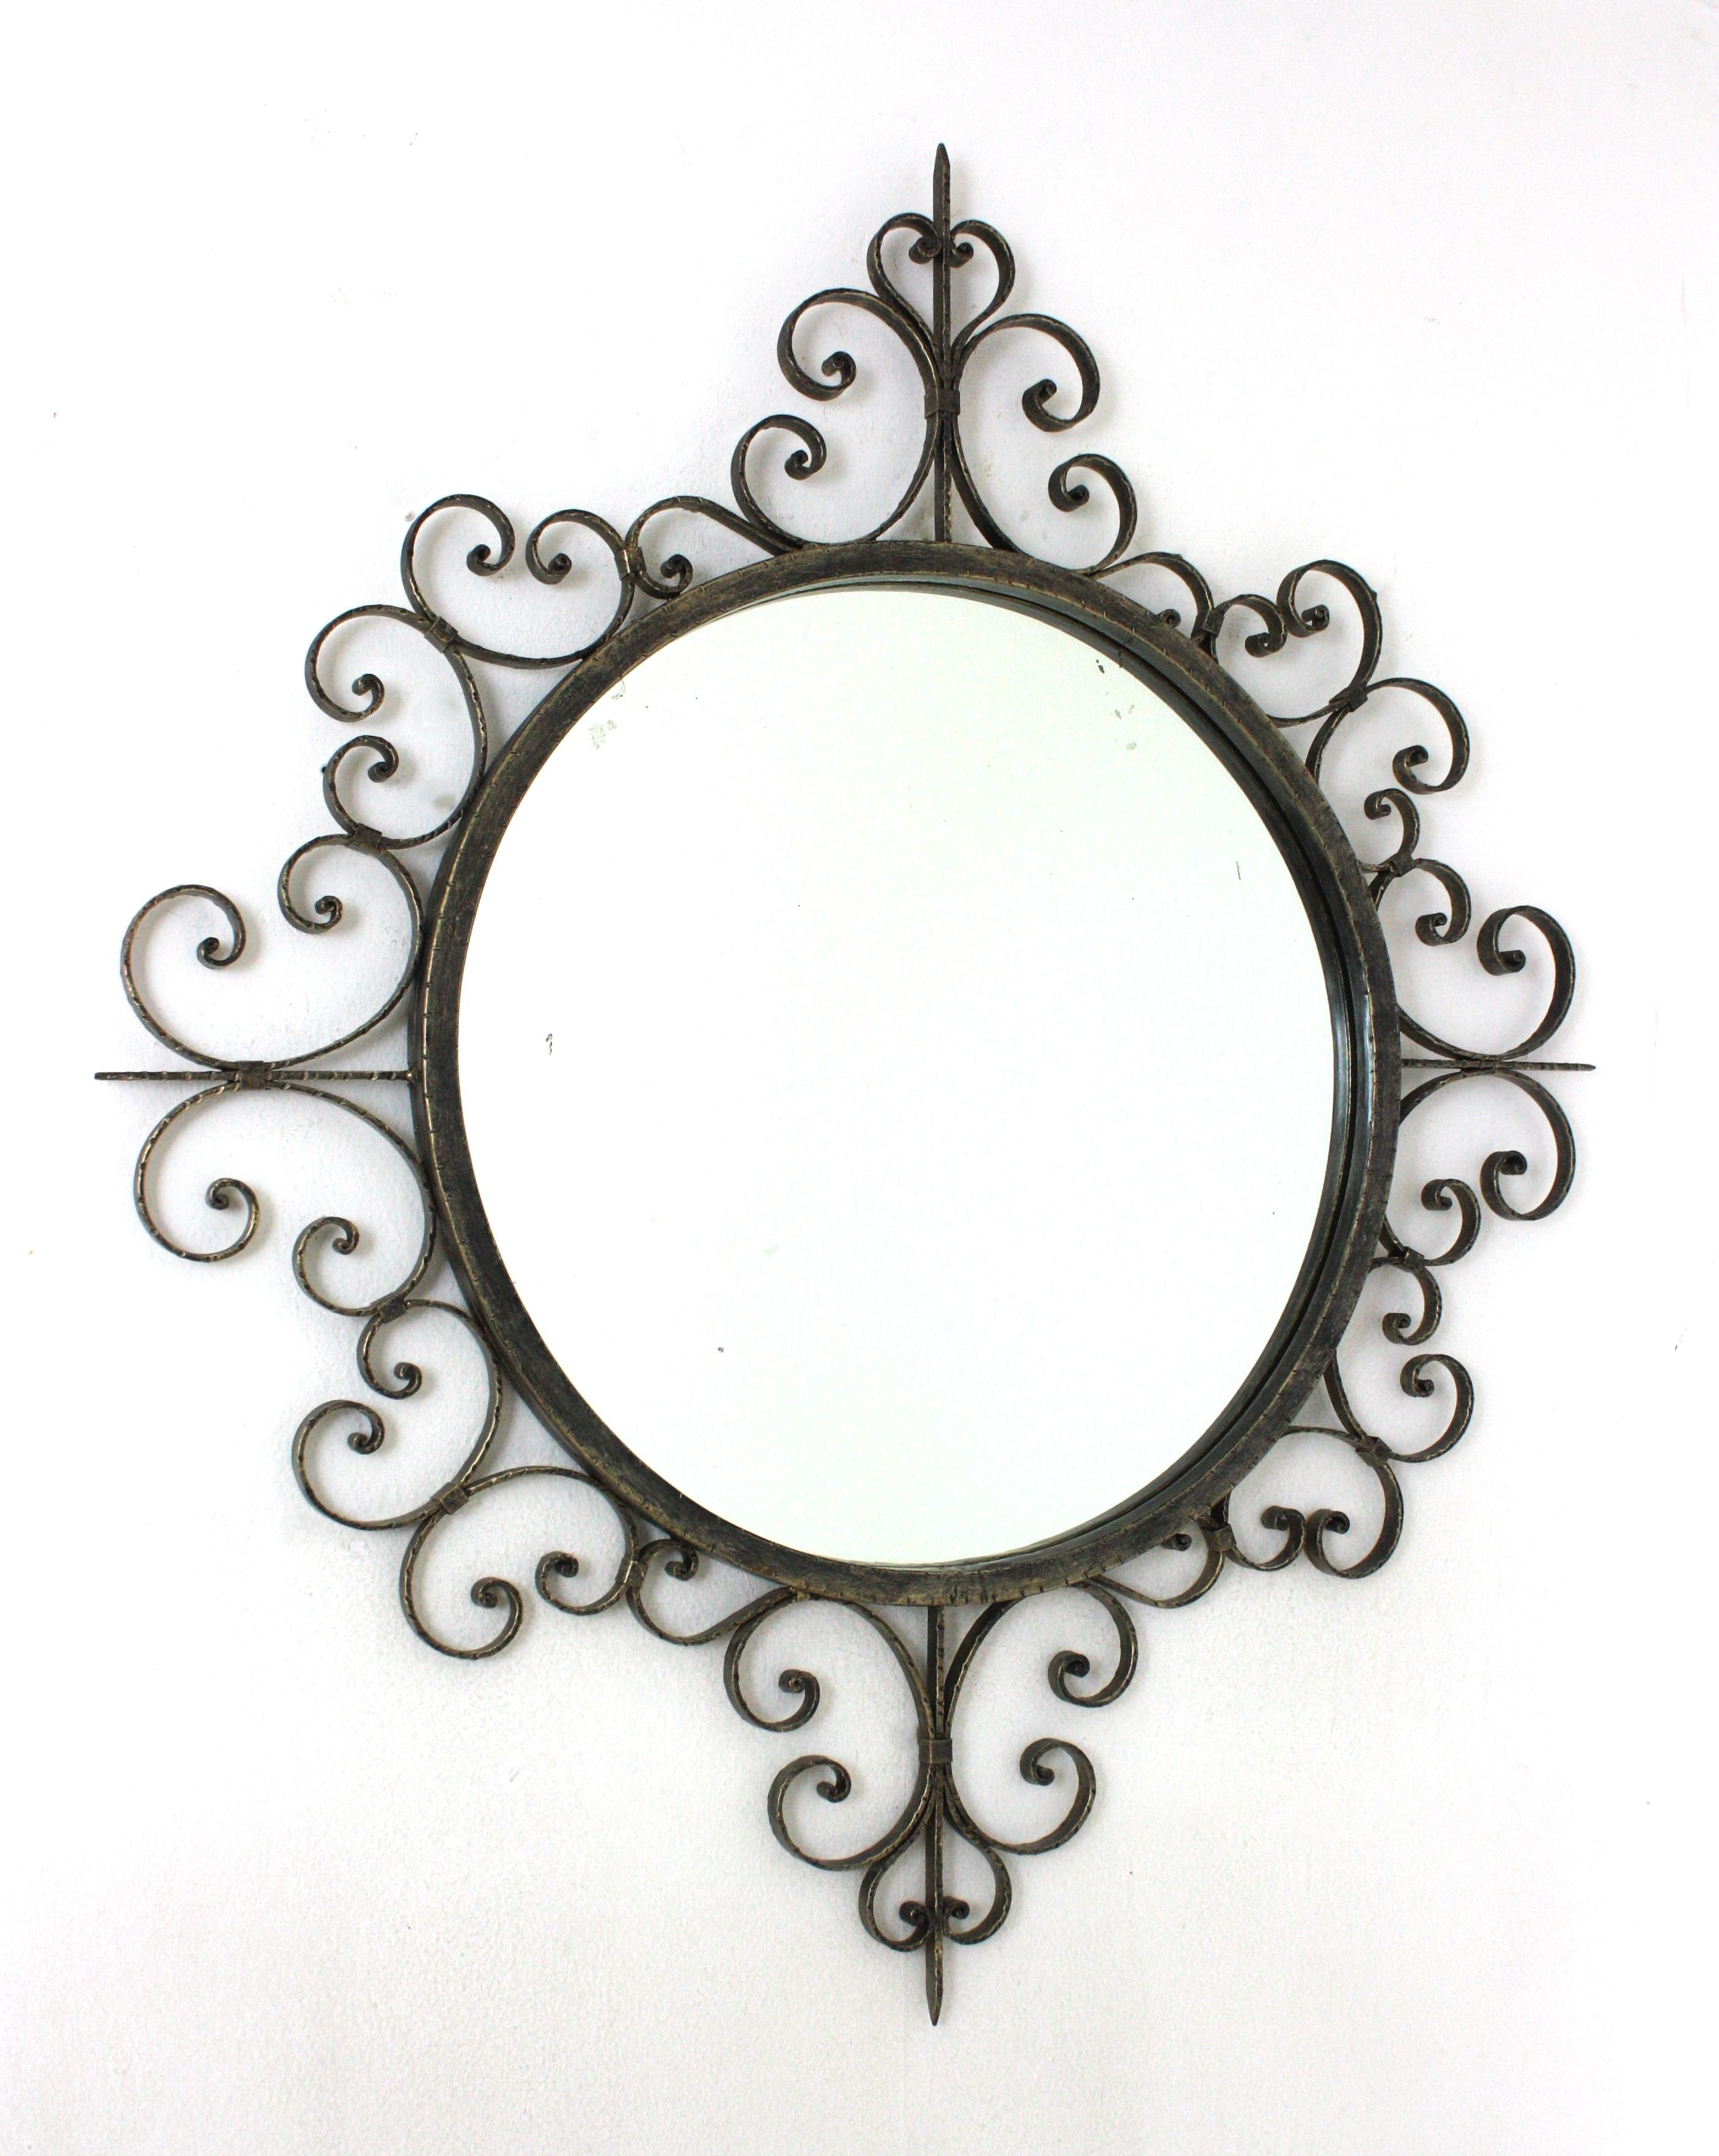 Large Scrollwork Silvered Wall Mirror, Hand Forged Iron, Spain, 1940s
Eye-catching ornamented scrolled wrought iron mirror with Spanish Colonial taste. Patinated in silver color.
This handcrafted mirror was manufactured in Spain at the Mid-Century